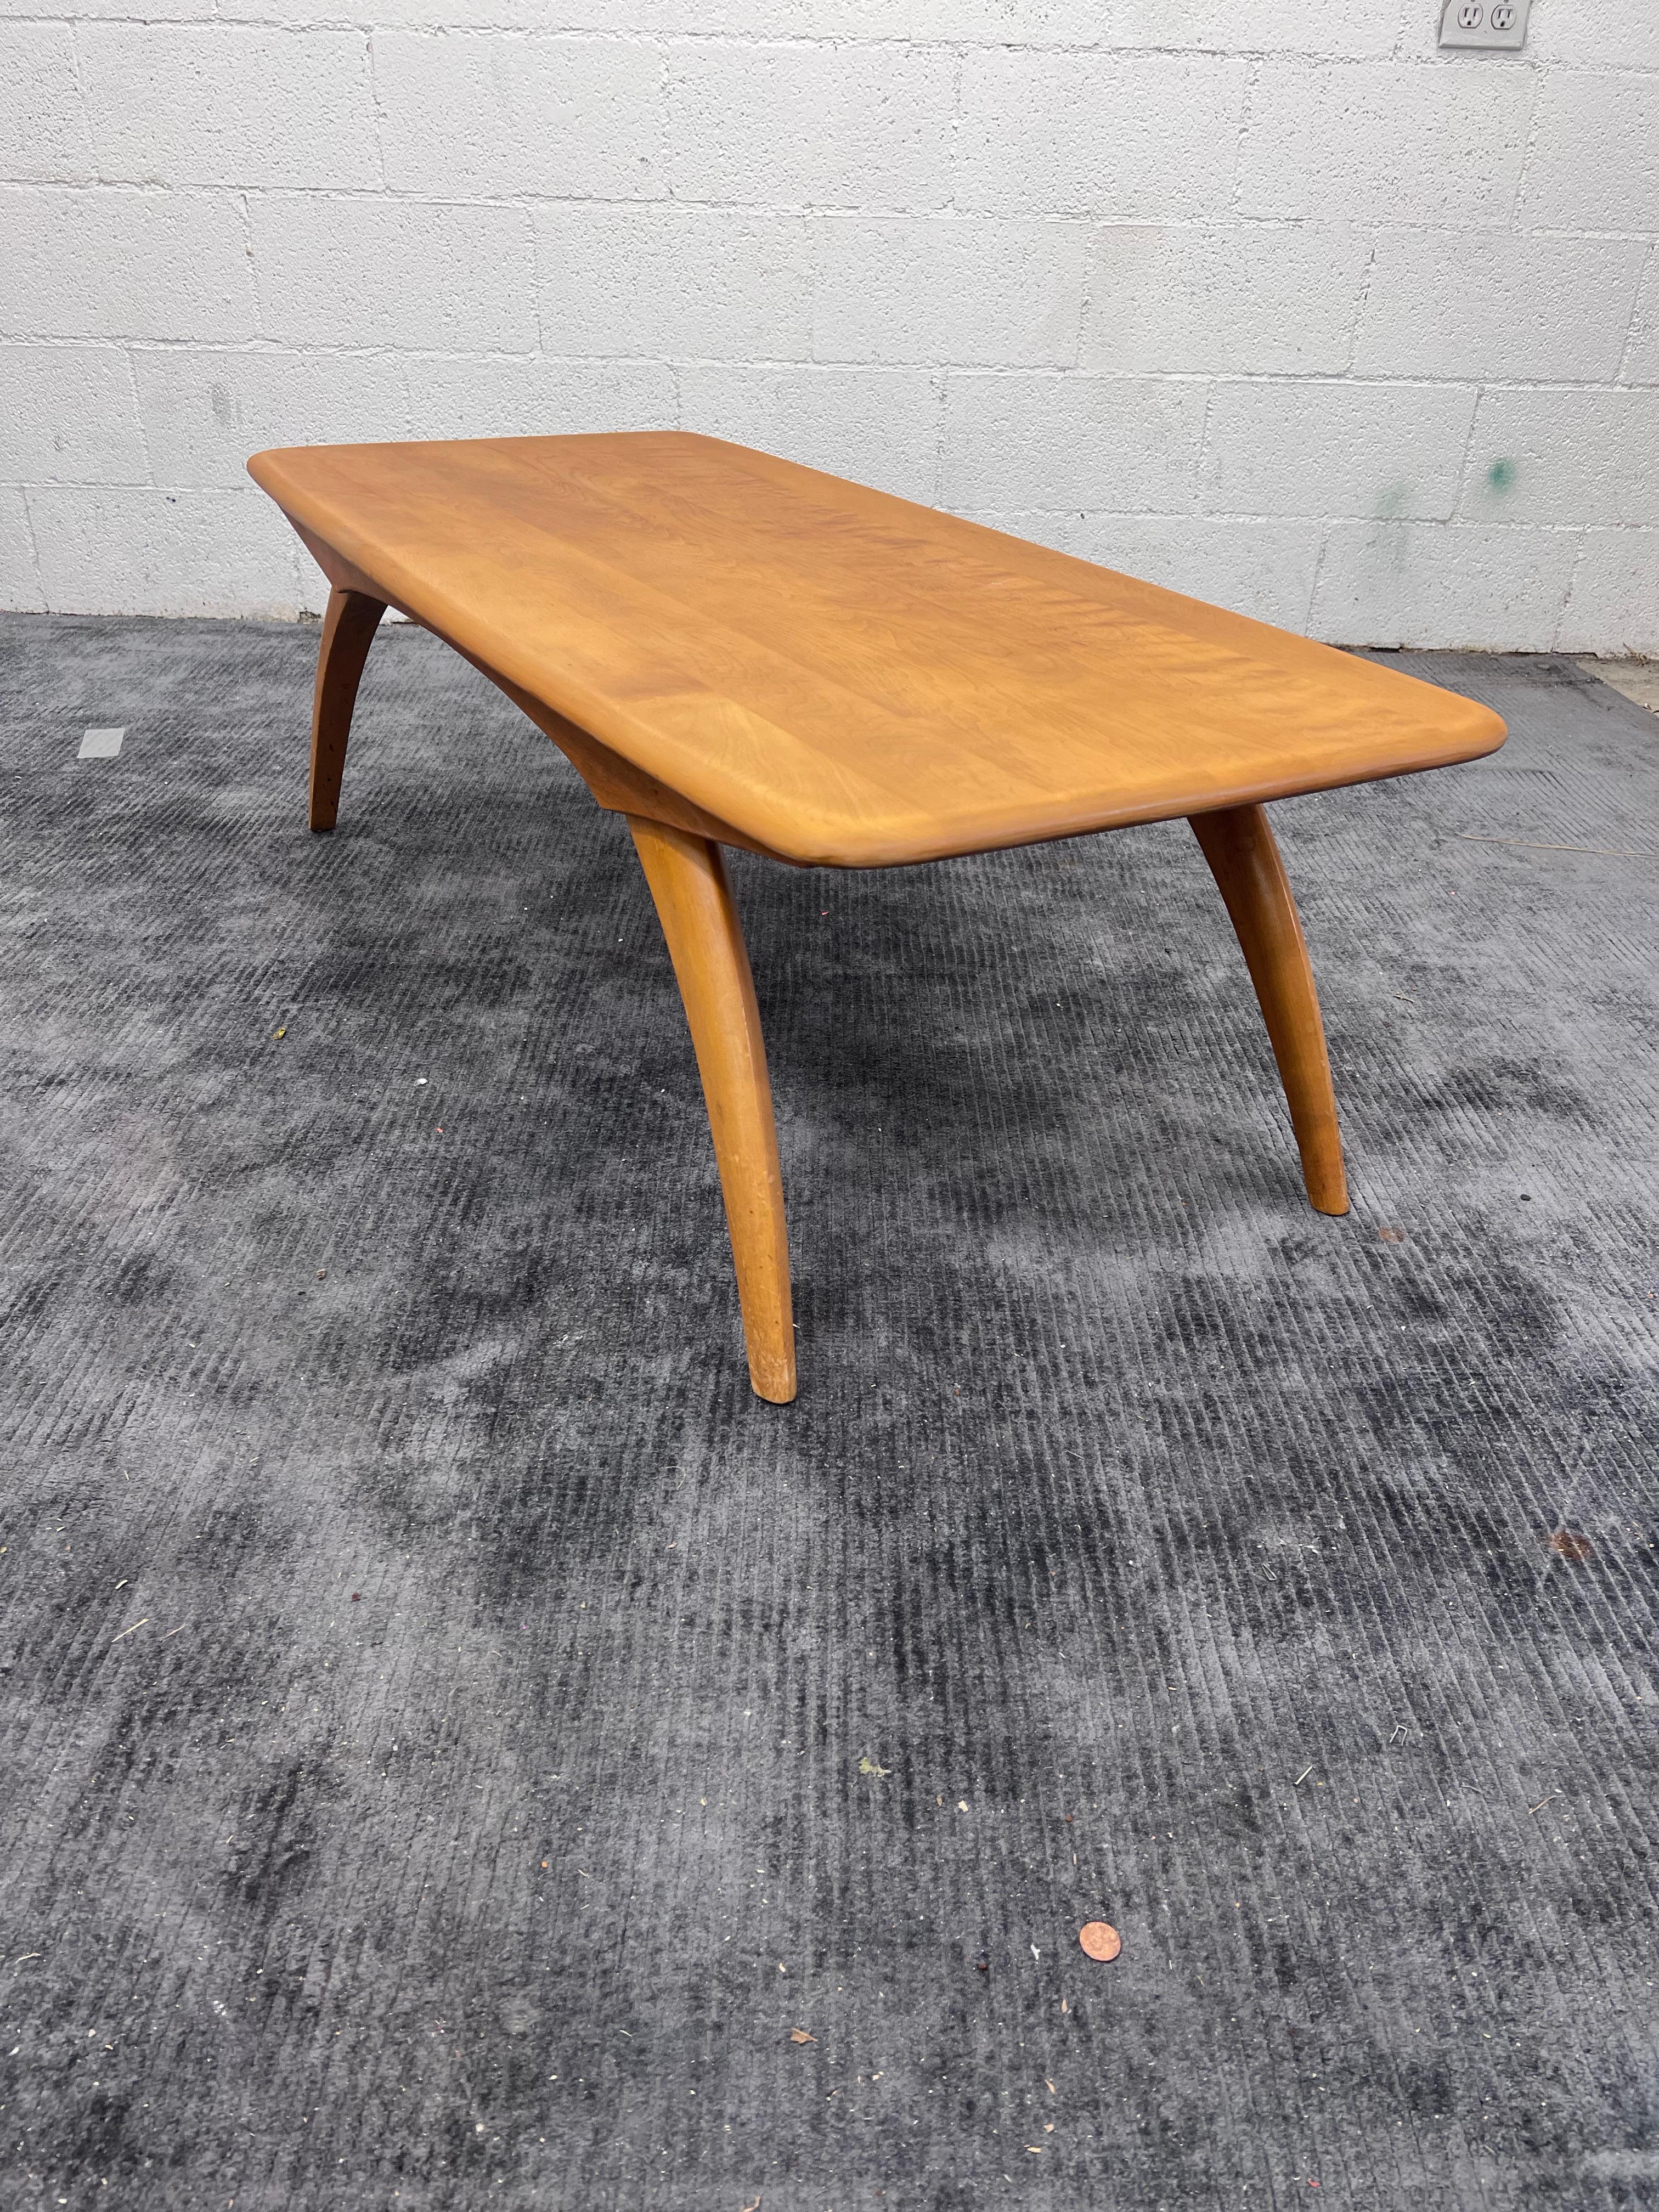 Manufactured 1953-1955 only. This table is made in Solid birch with arched wishbone legs.